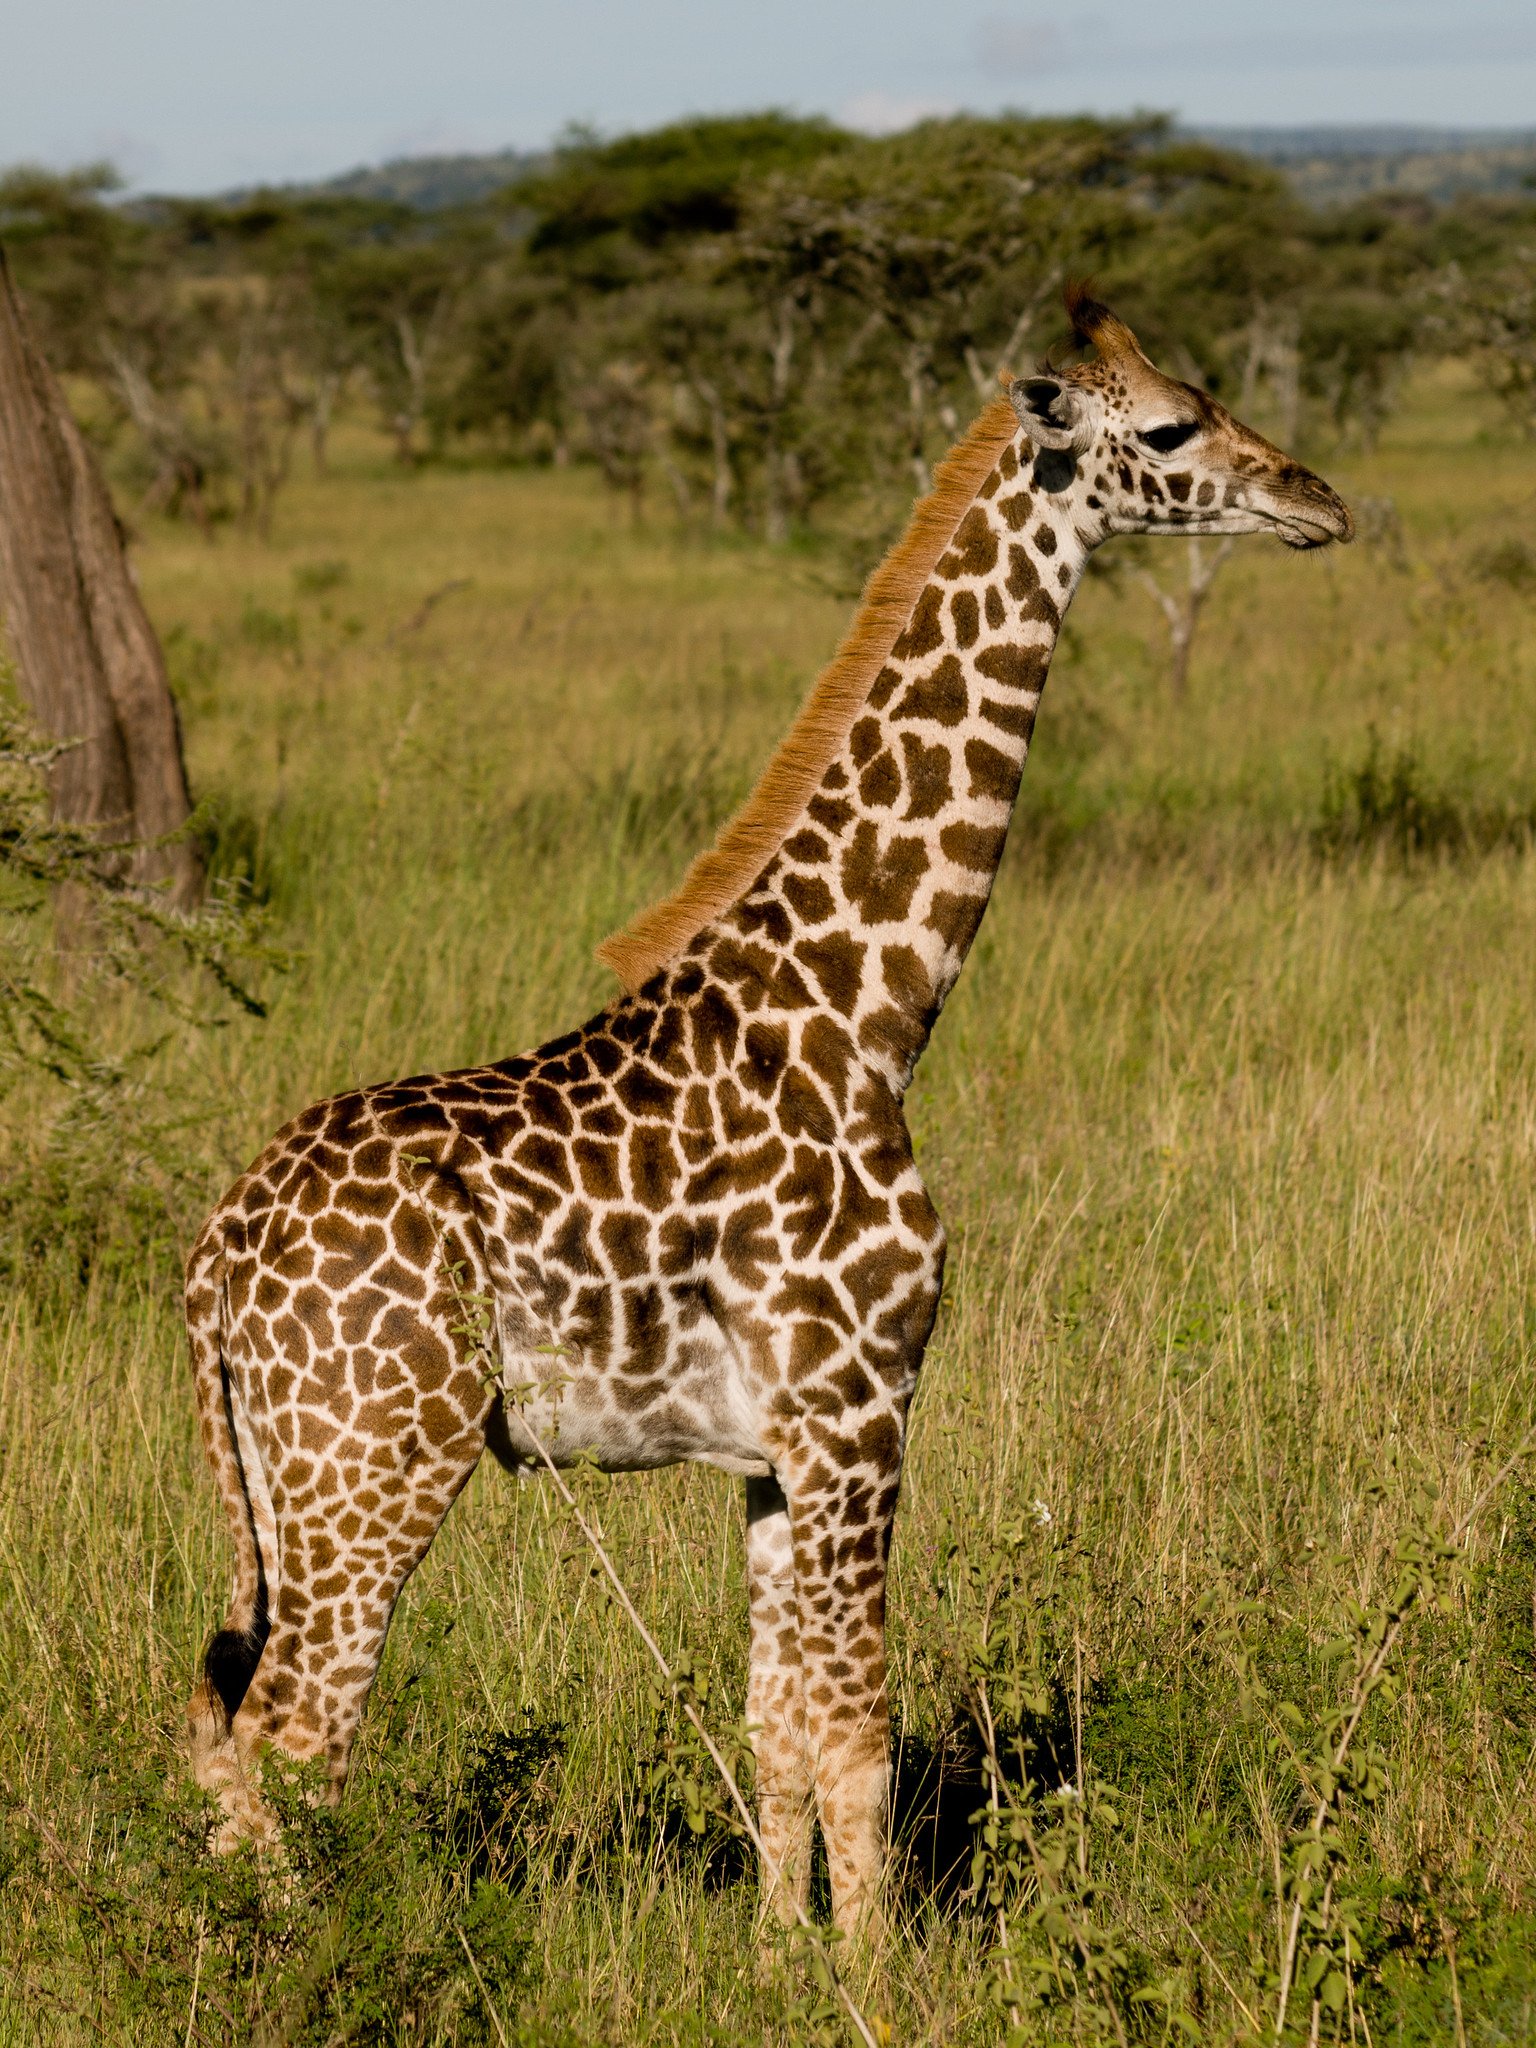 A portrait of a giraffe in the Serengeti National Park, Tanzania on April 3, 2008 | Photo: Flickr/William Warby